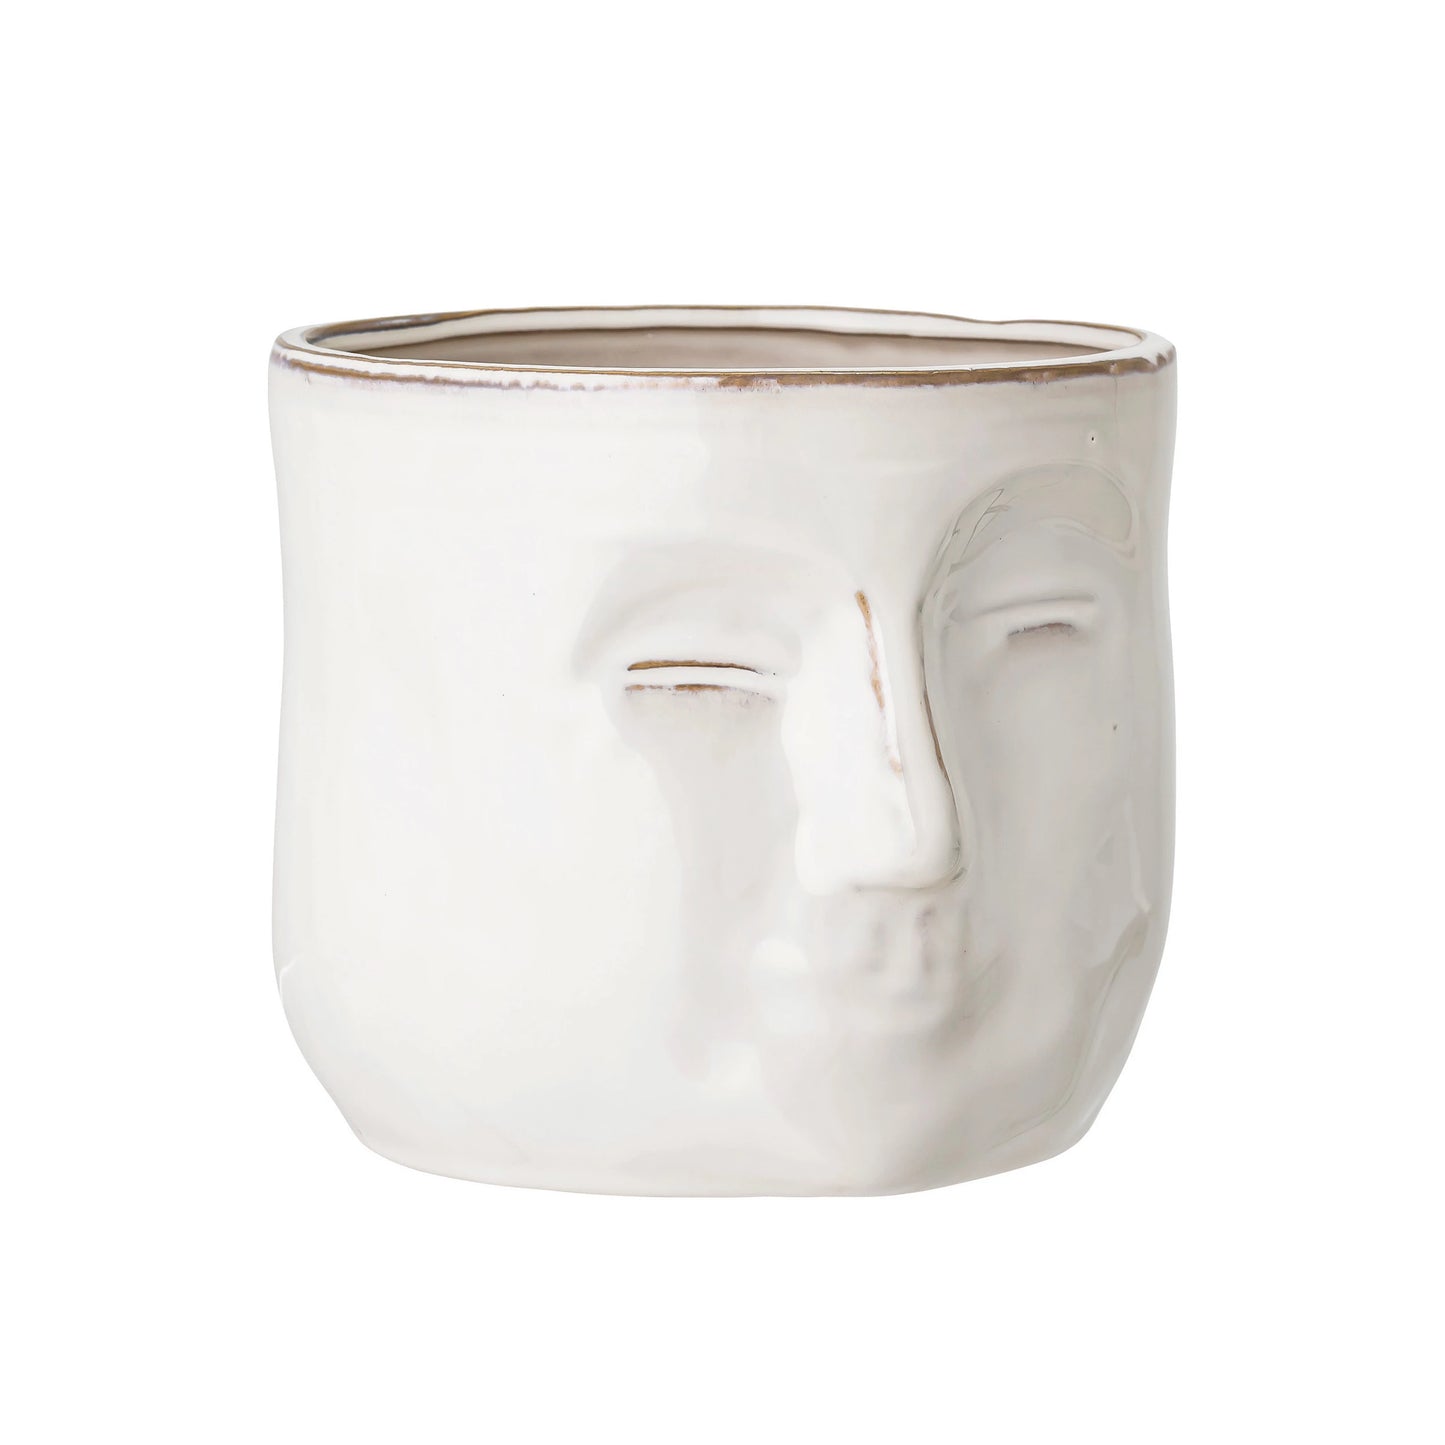 angled view of the face planter on a white background